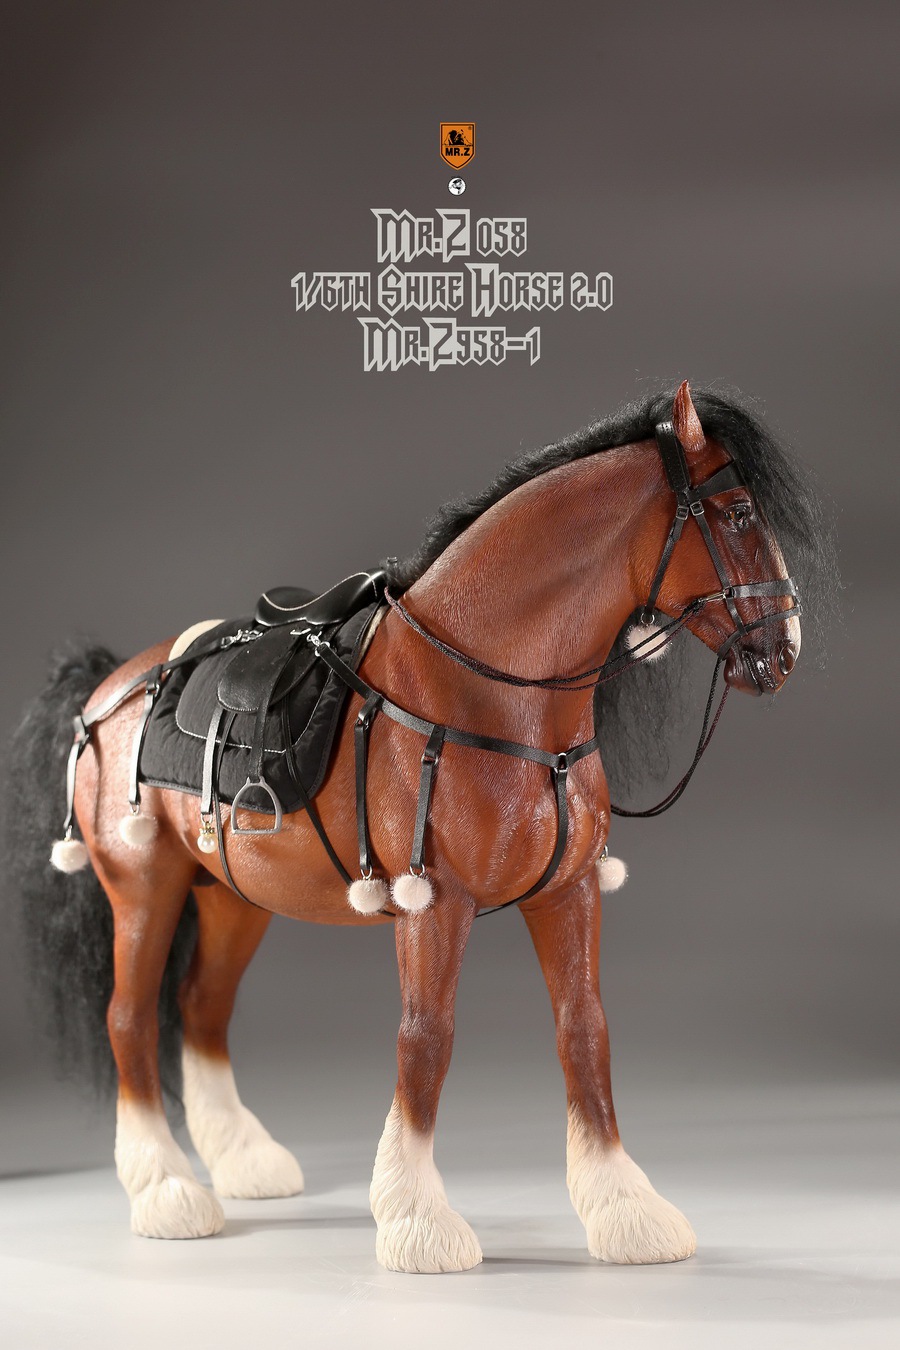 Mr - NEW PRODUCT: MR. Z: 58th round-Shire Horse 2.0 version full set of 5 colors  08573810